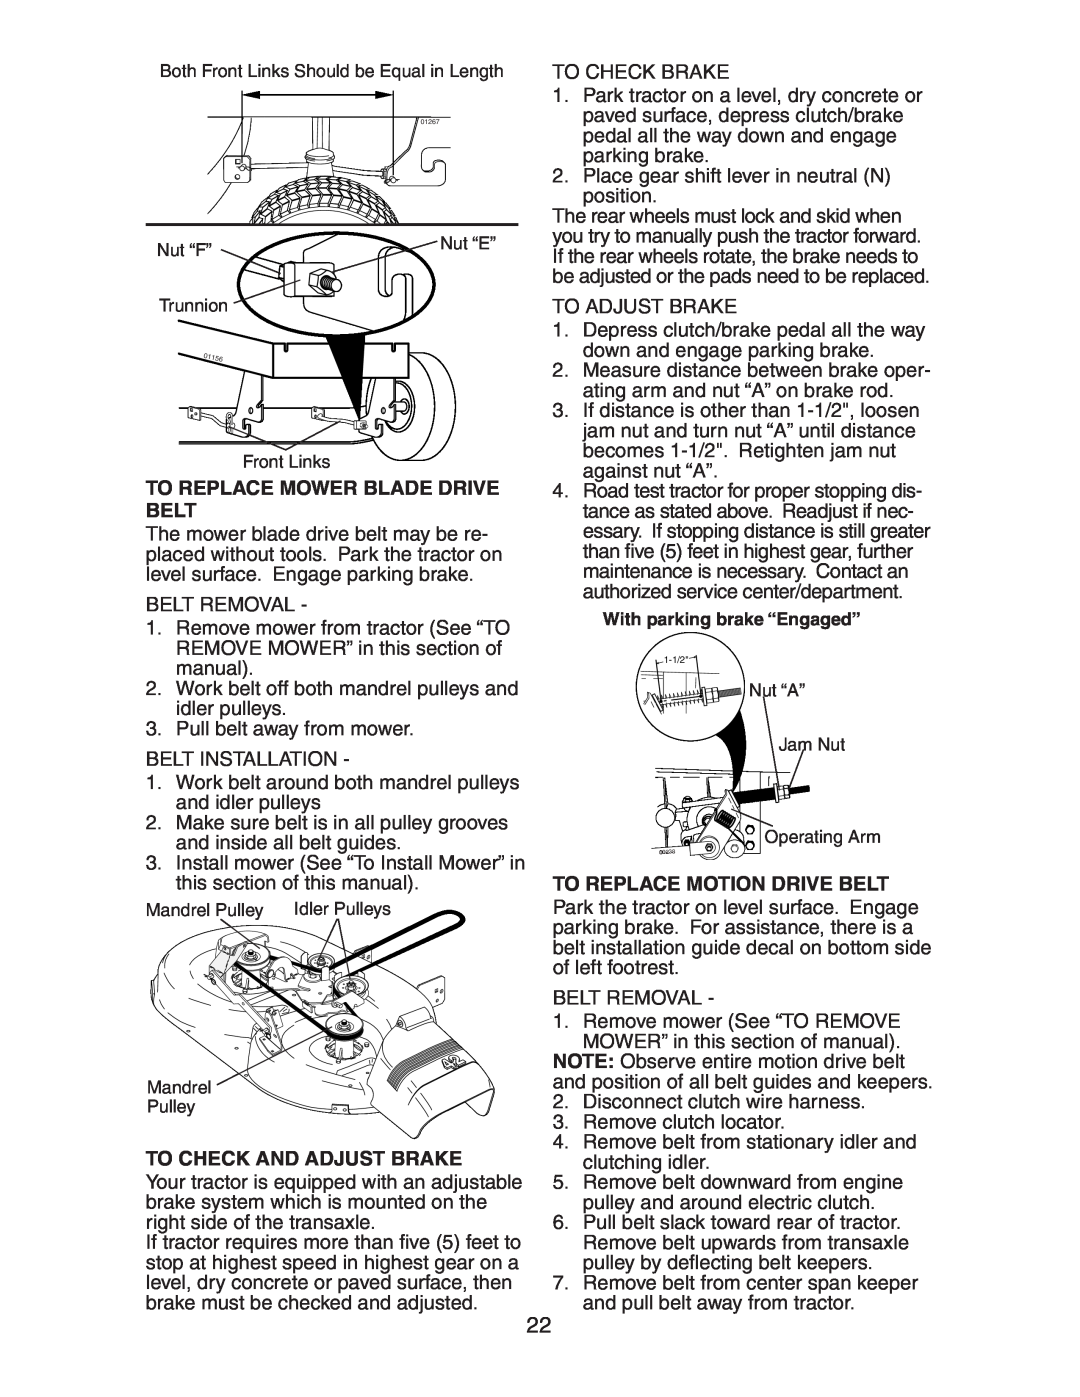 Poulan 192362 manual To Replace Mower Blade Drive Belt, To Check And Adjust Brake, To Replace Motion Drive Belt 